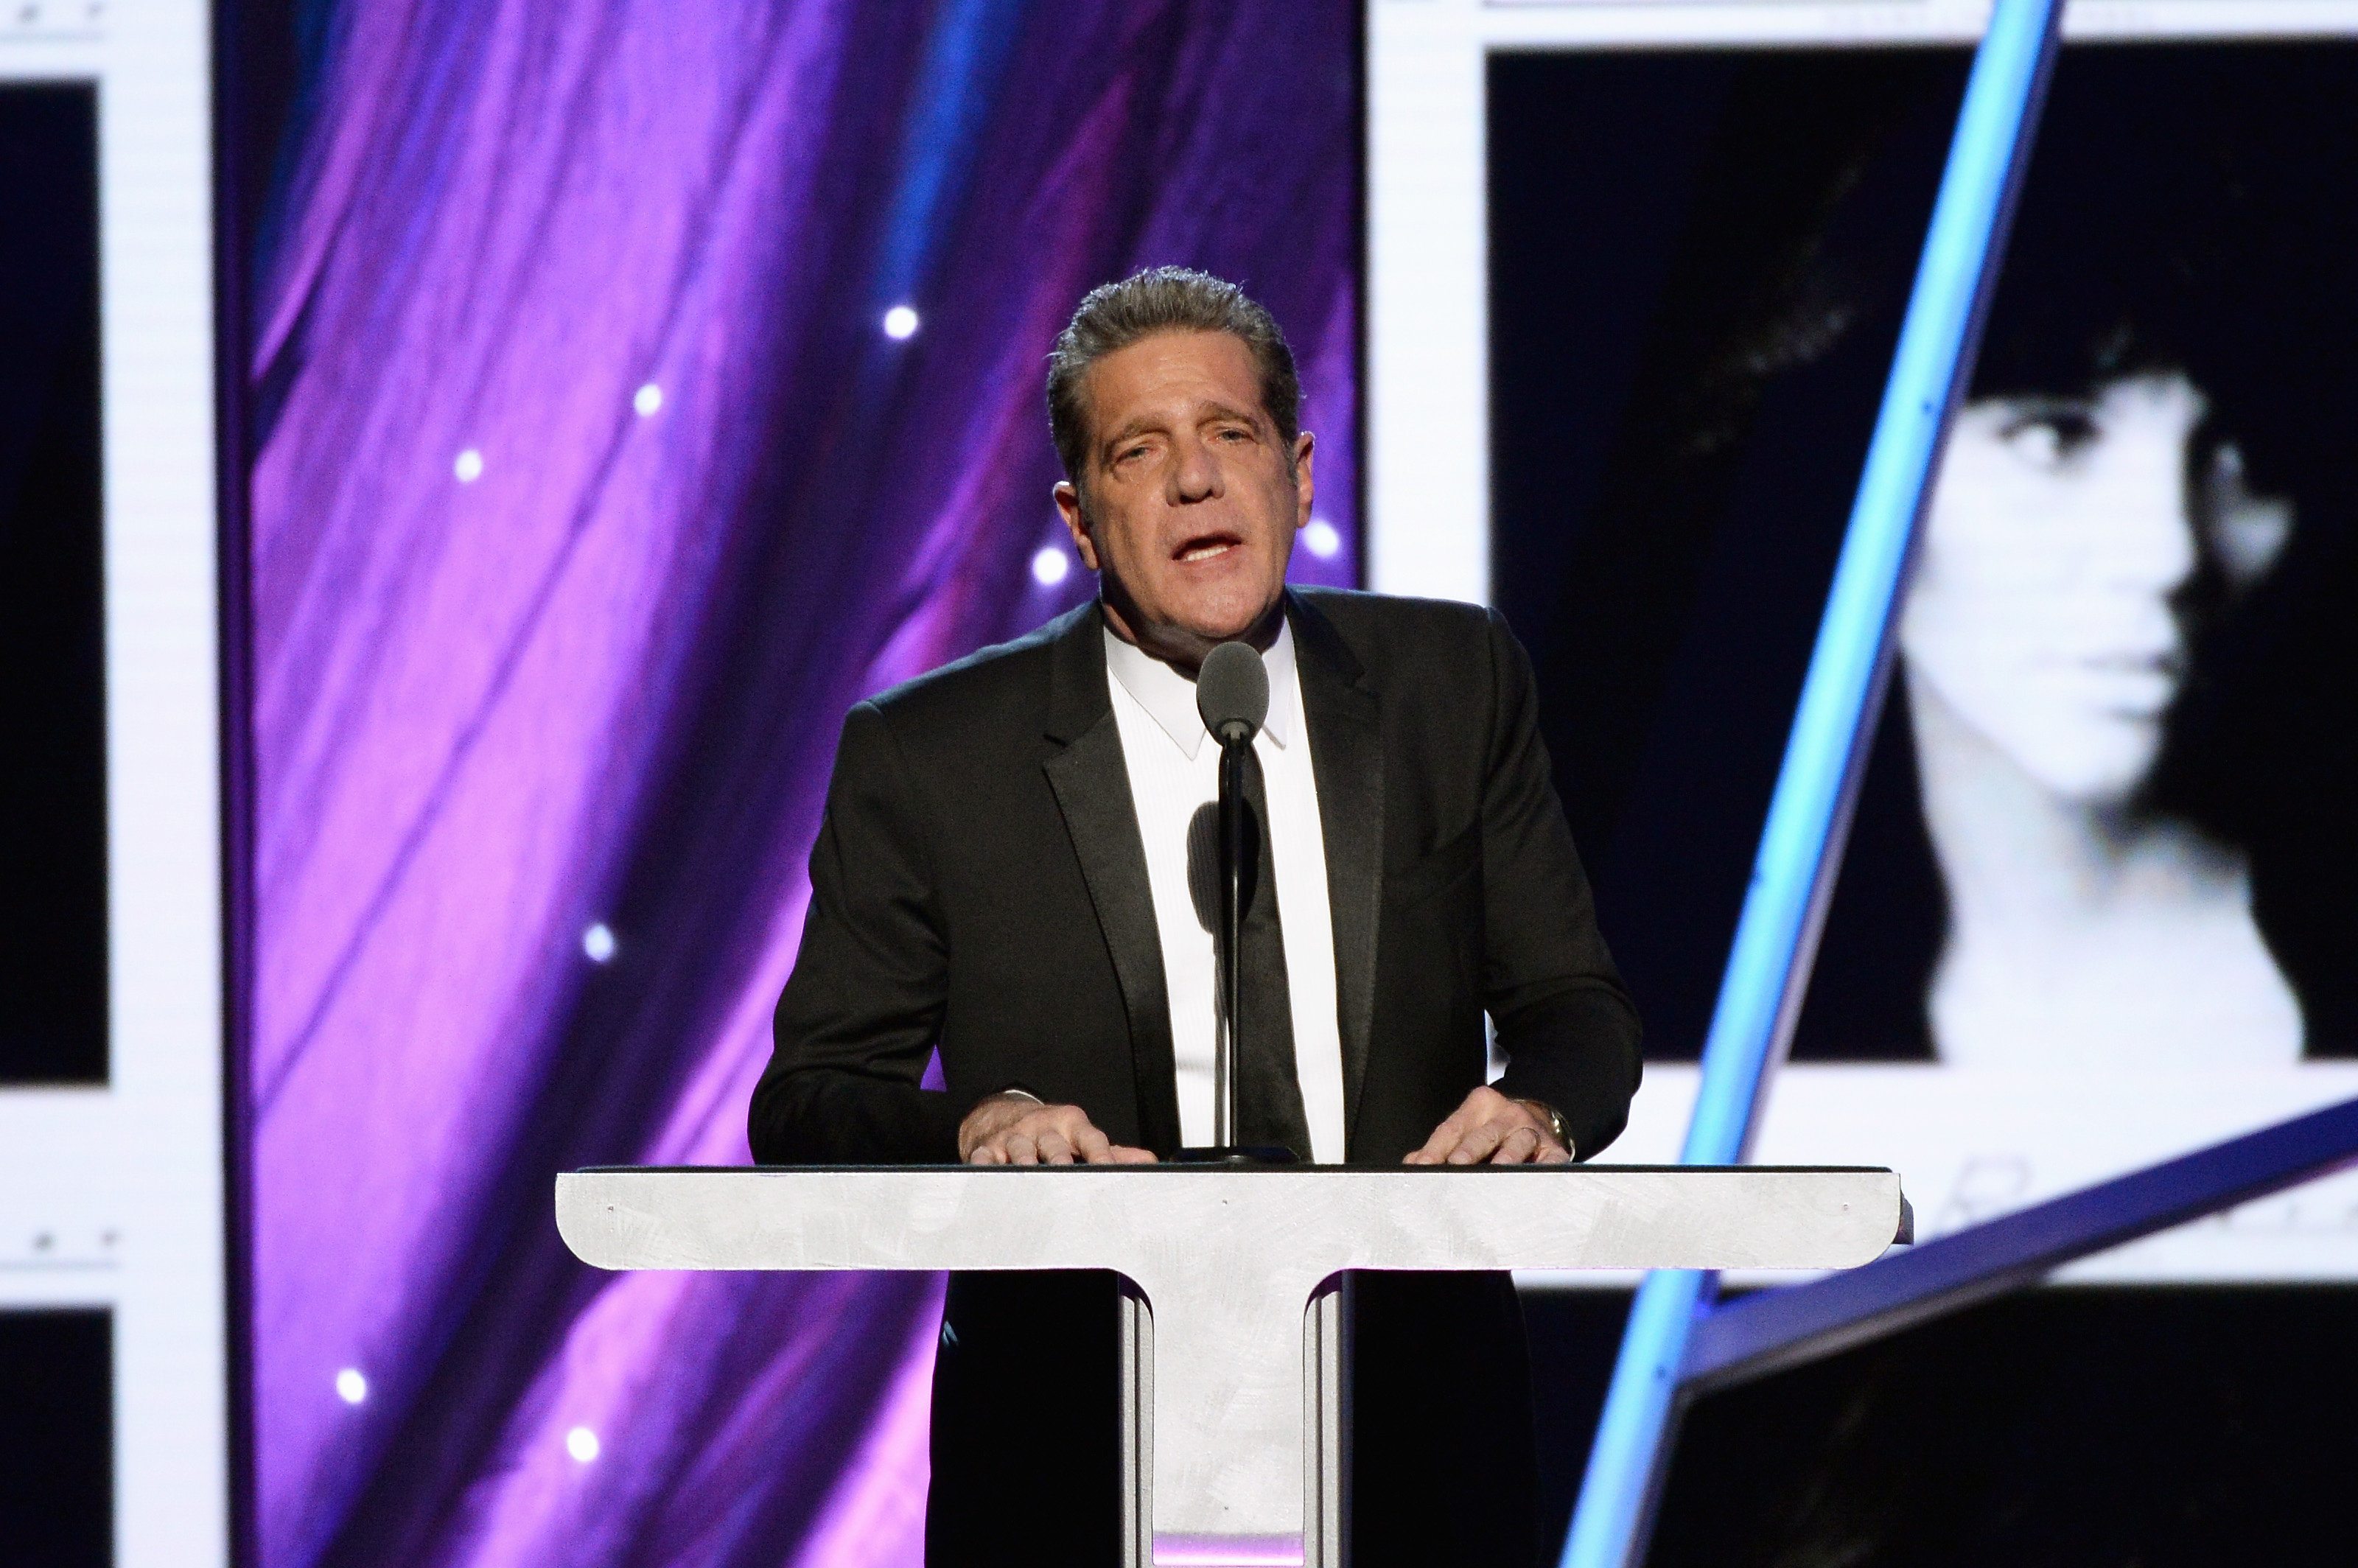 Glenn Frey speaks onstage, inducting Linda Ronstadt into the Rock And Roll Hall Of Fame, at Barclays Center in Brooklyn on April 10, 2014. (Larry Busacca—Getty Images)